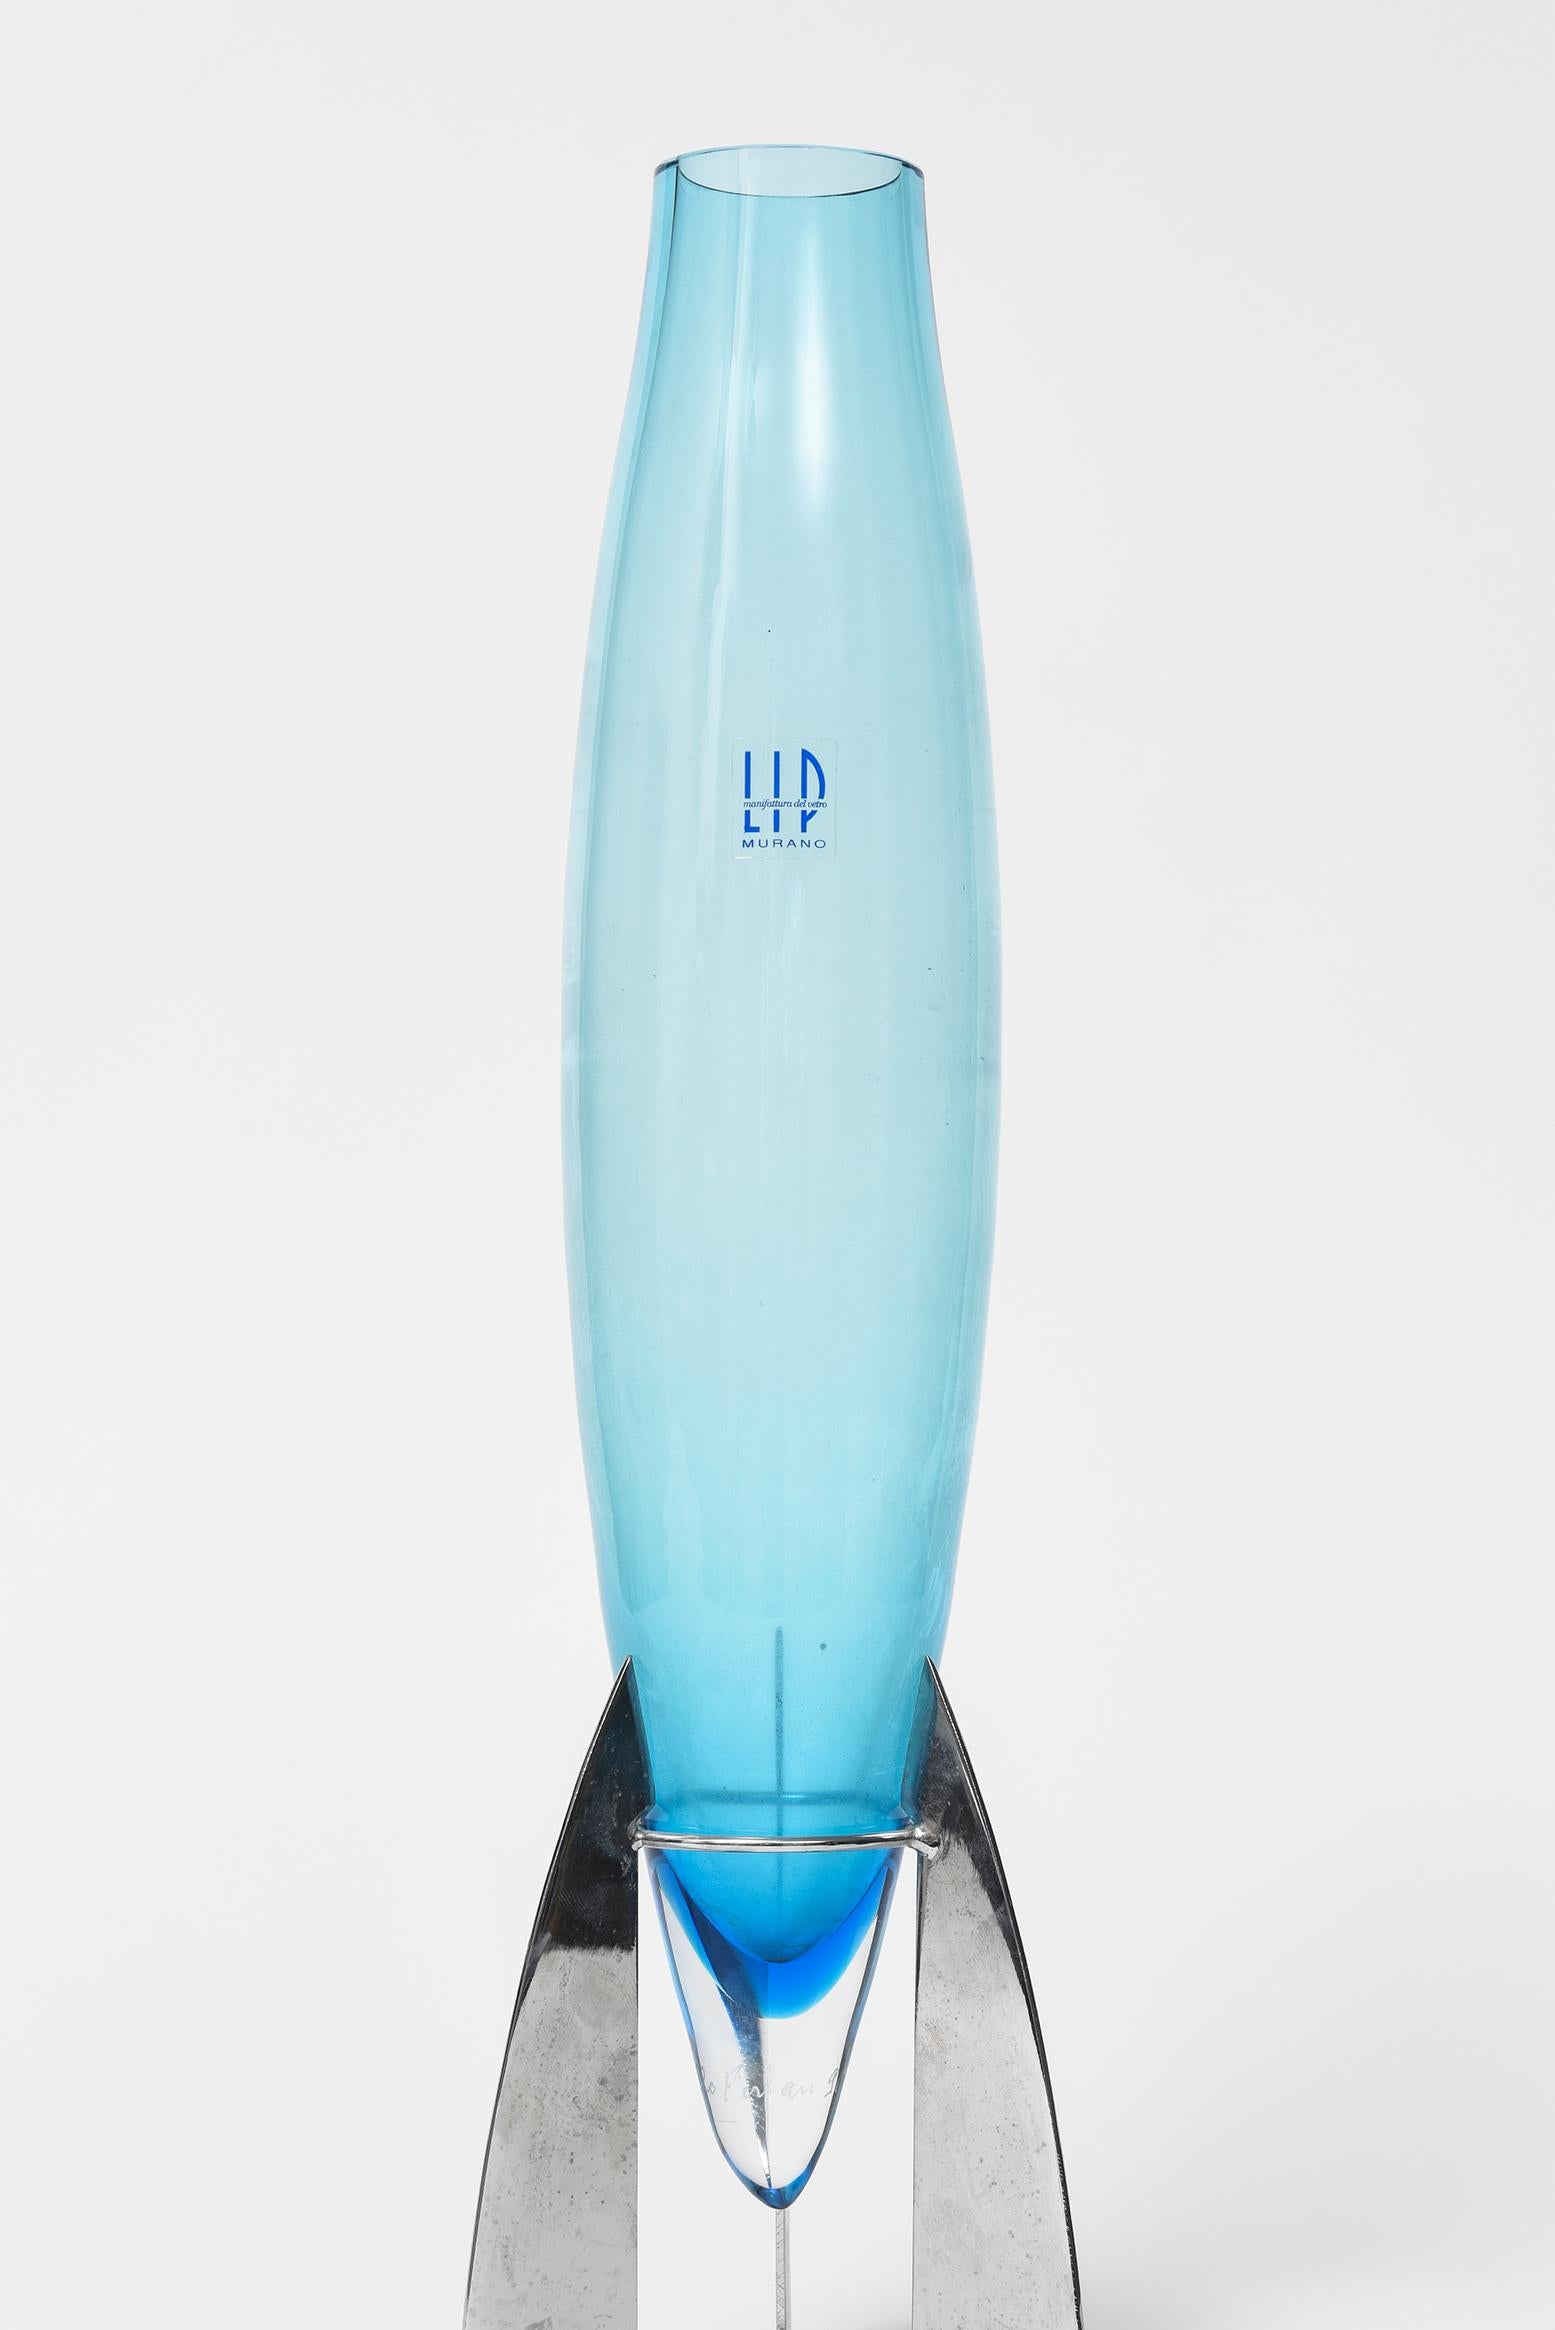 Marcello Furlan LIP Manifattura del Vetro blue murano Italian vase with chrome metal stand. The vase looks like a industrial rocket ship.

It has the original sticker tag LIP manifattura del vetro vase and is etched signed on the bottom.